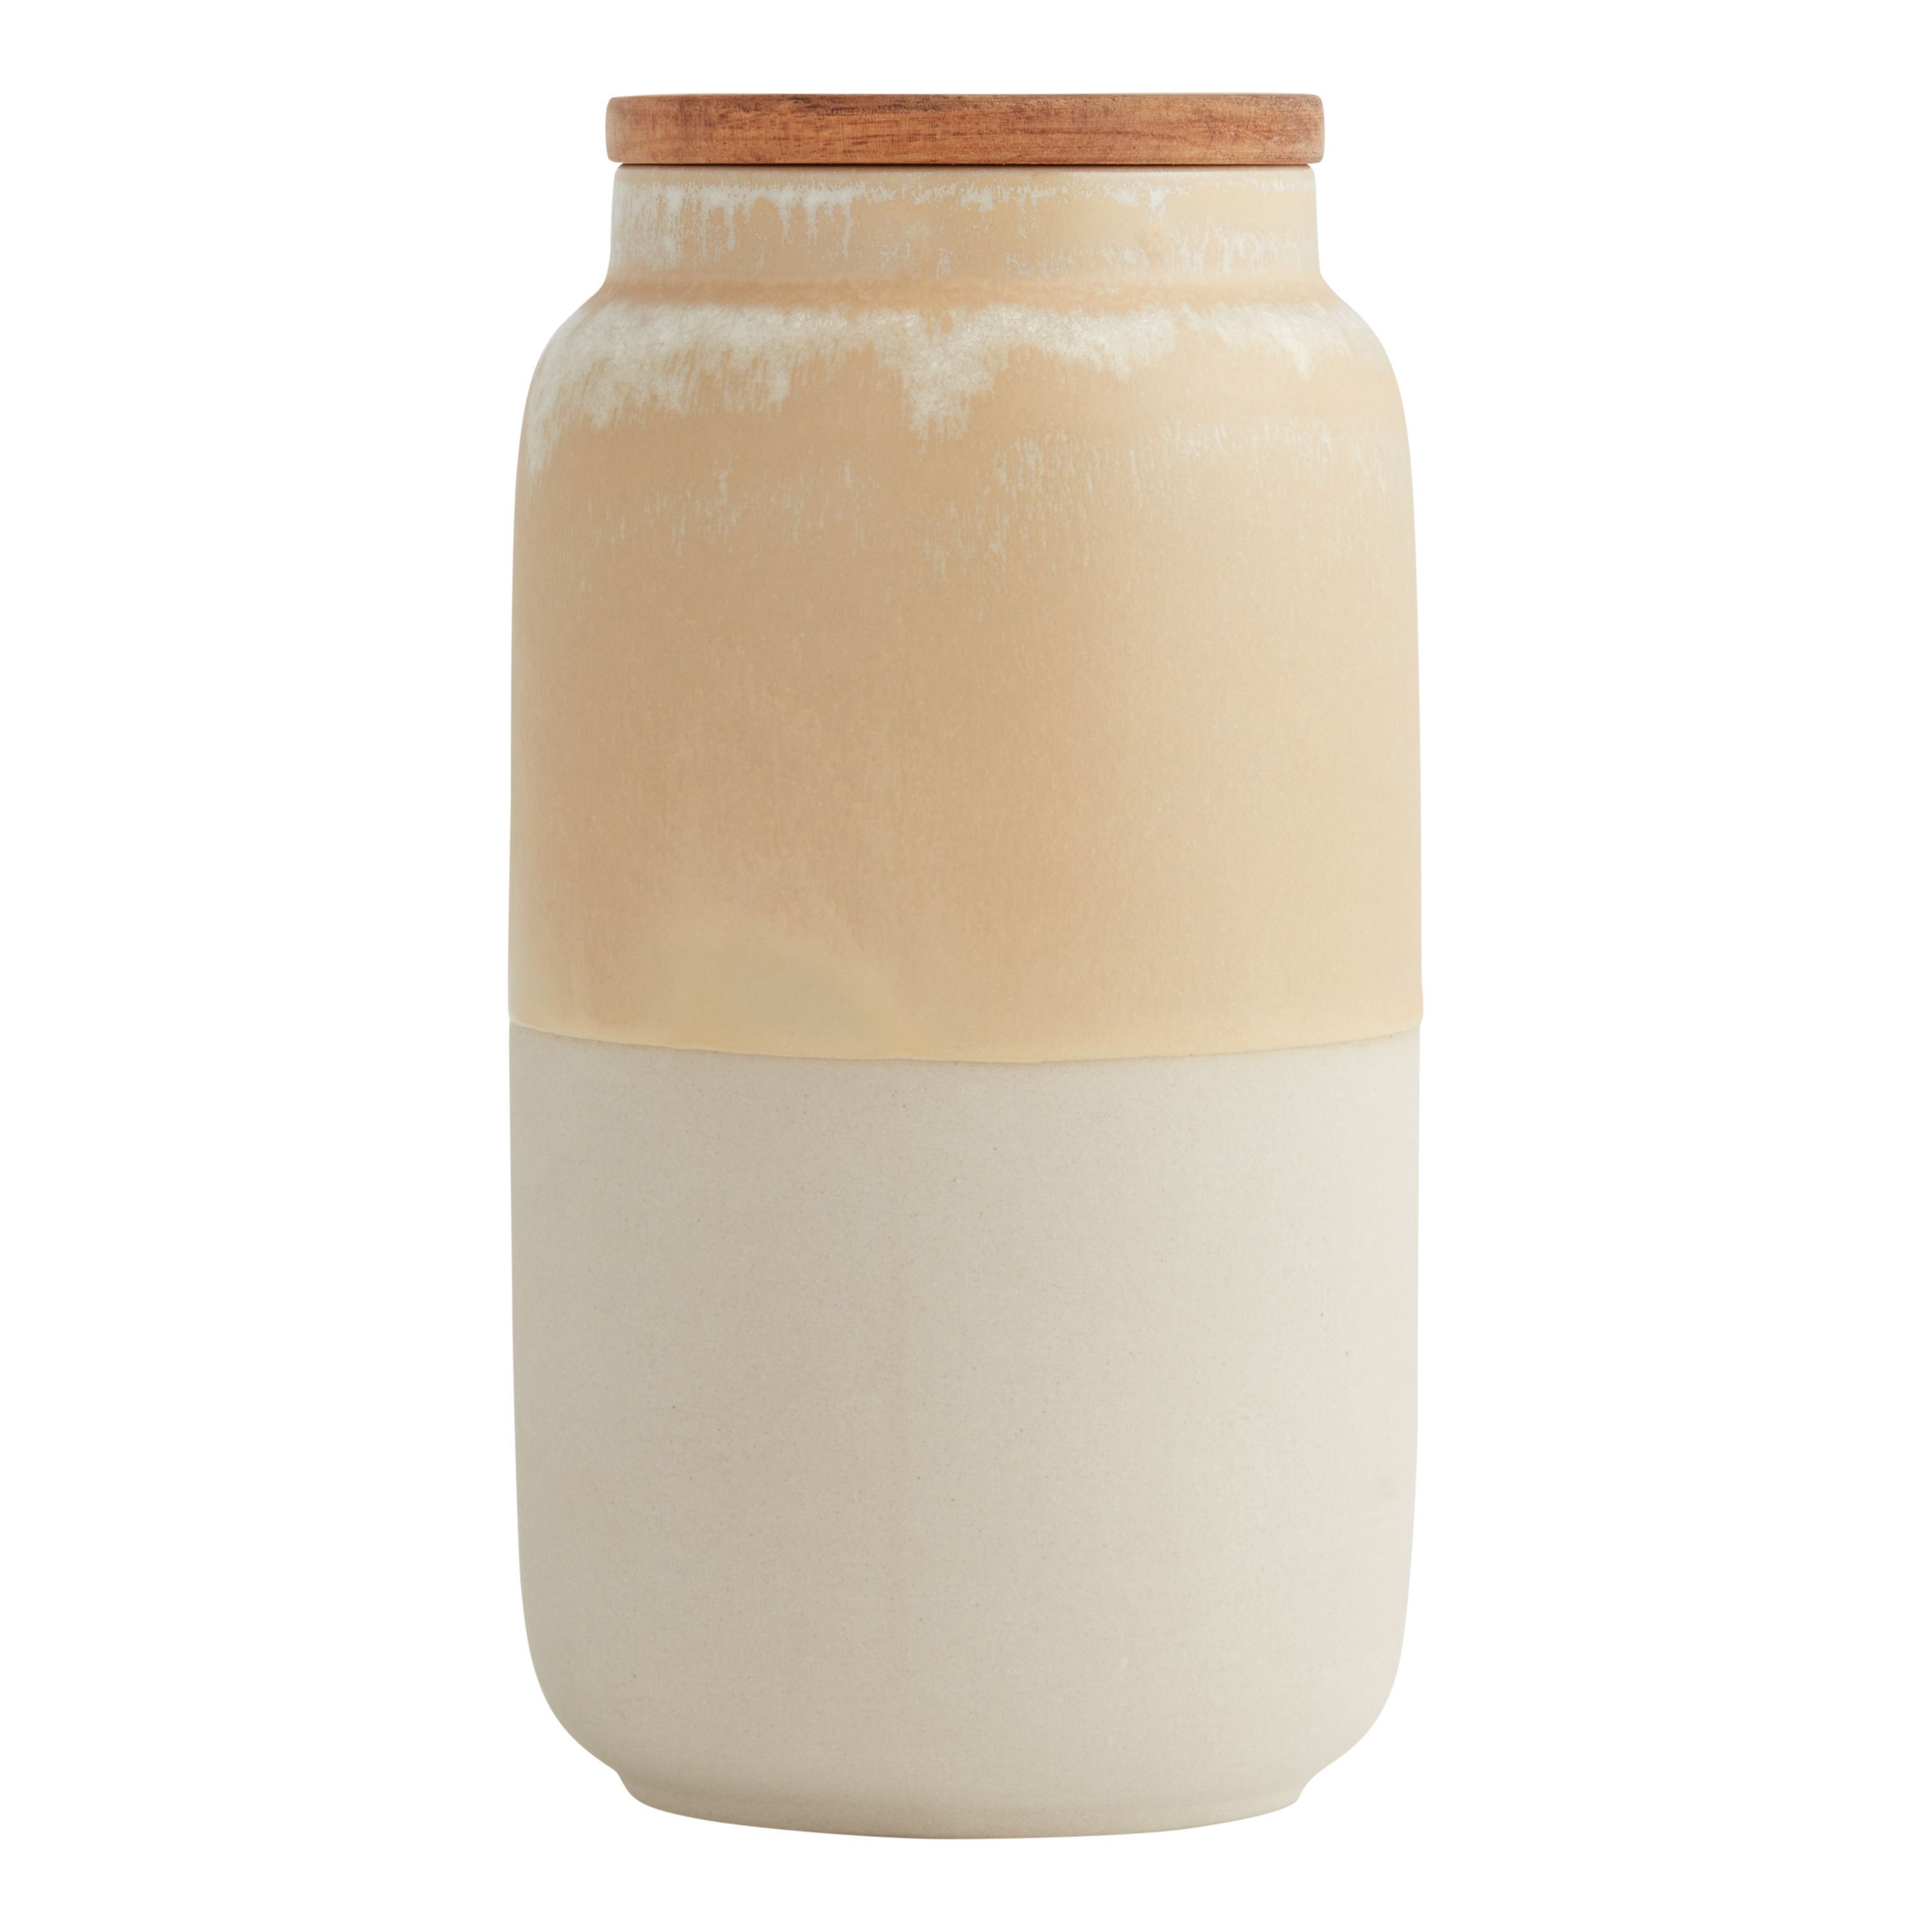 Tall Reactive Glaze Ceramic and Wood Storage Canister | World Market